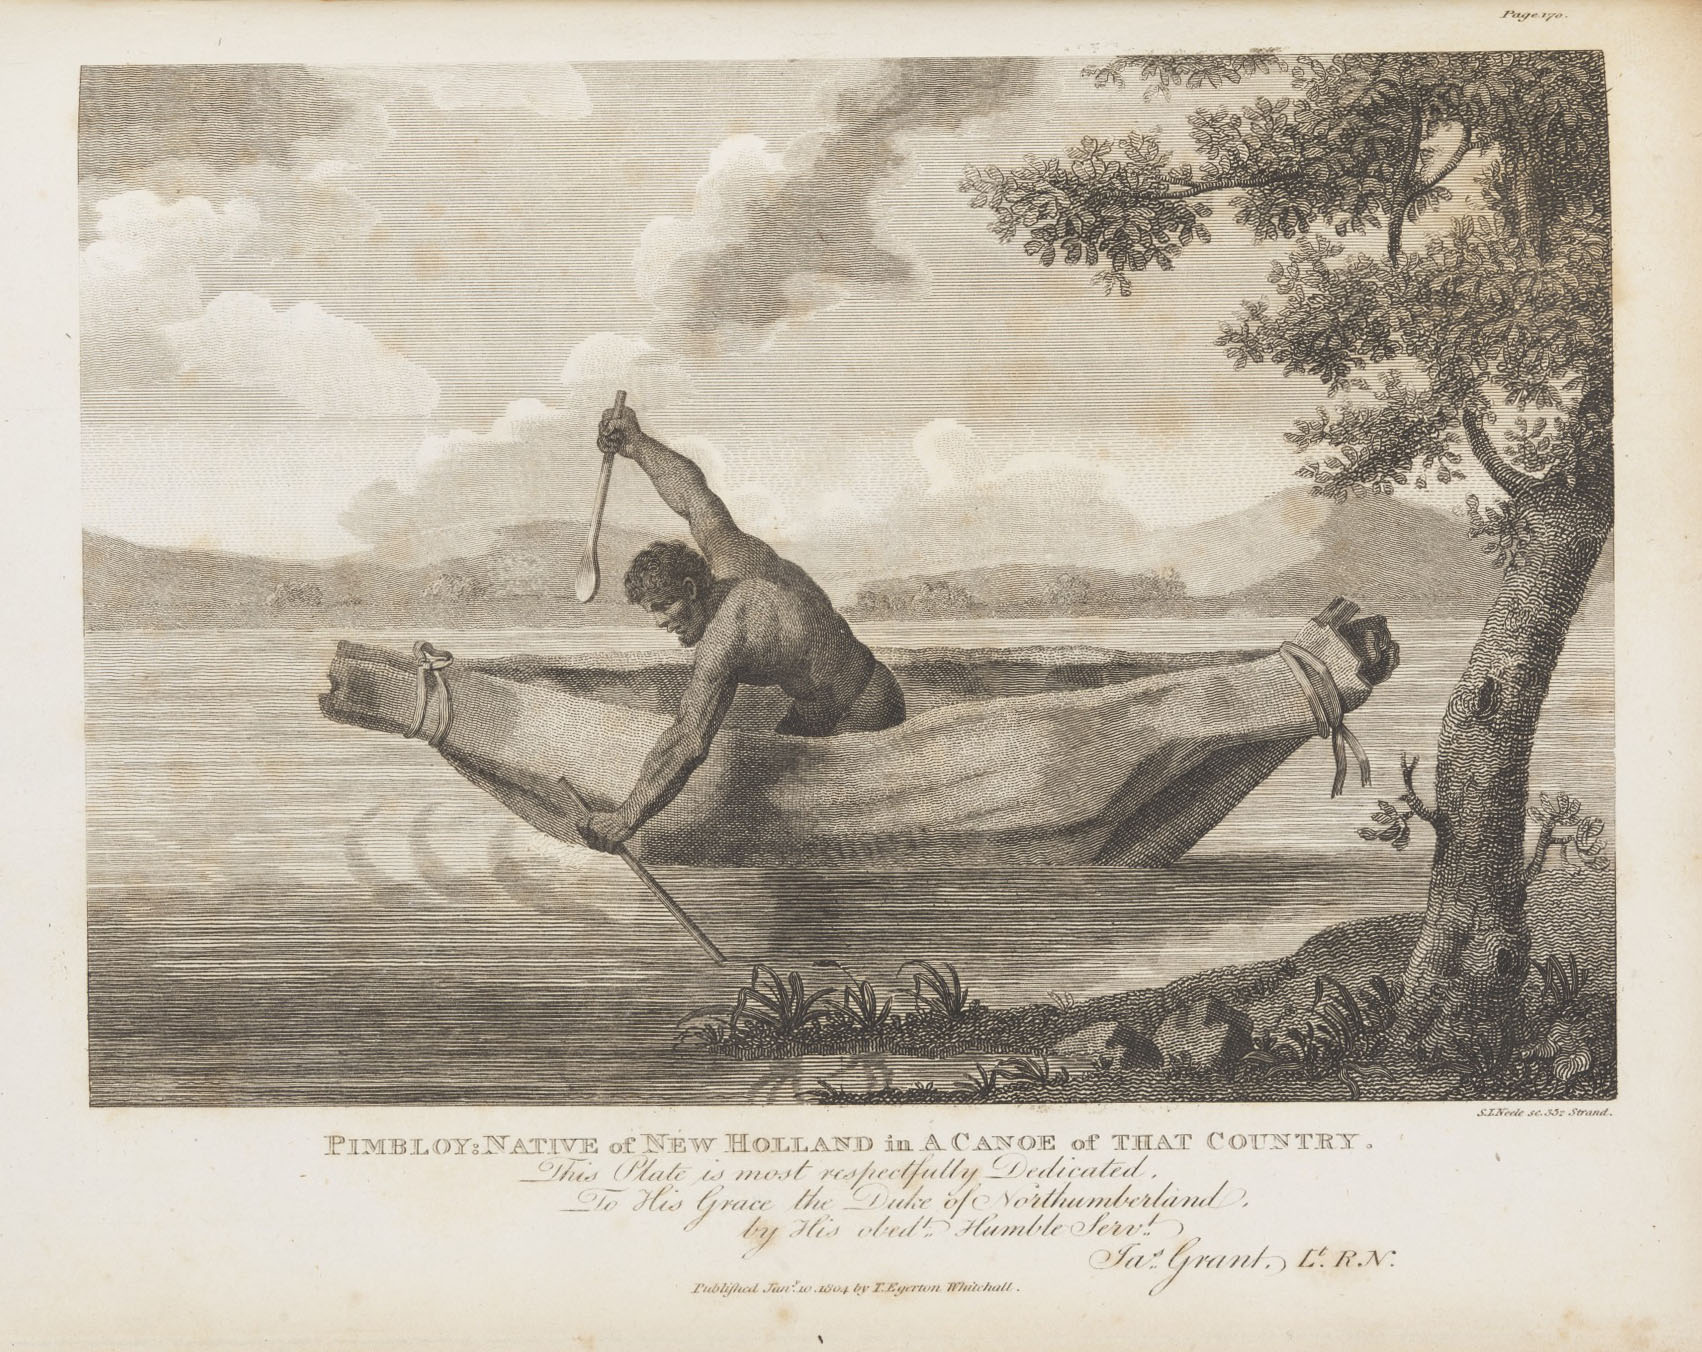 An engraving believed to be the only known depiction of Pemulwuy.